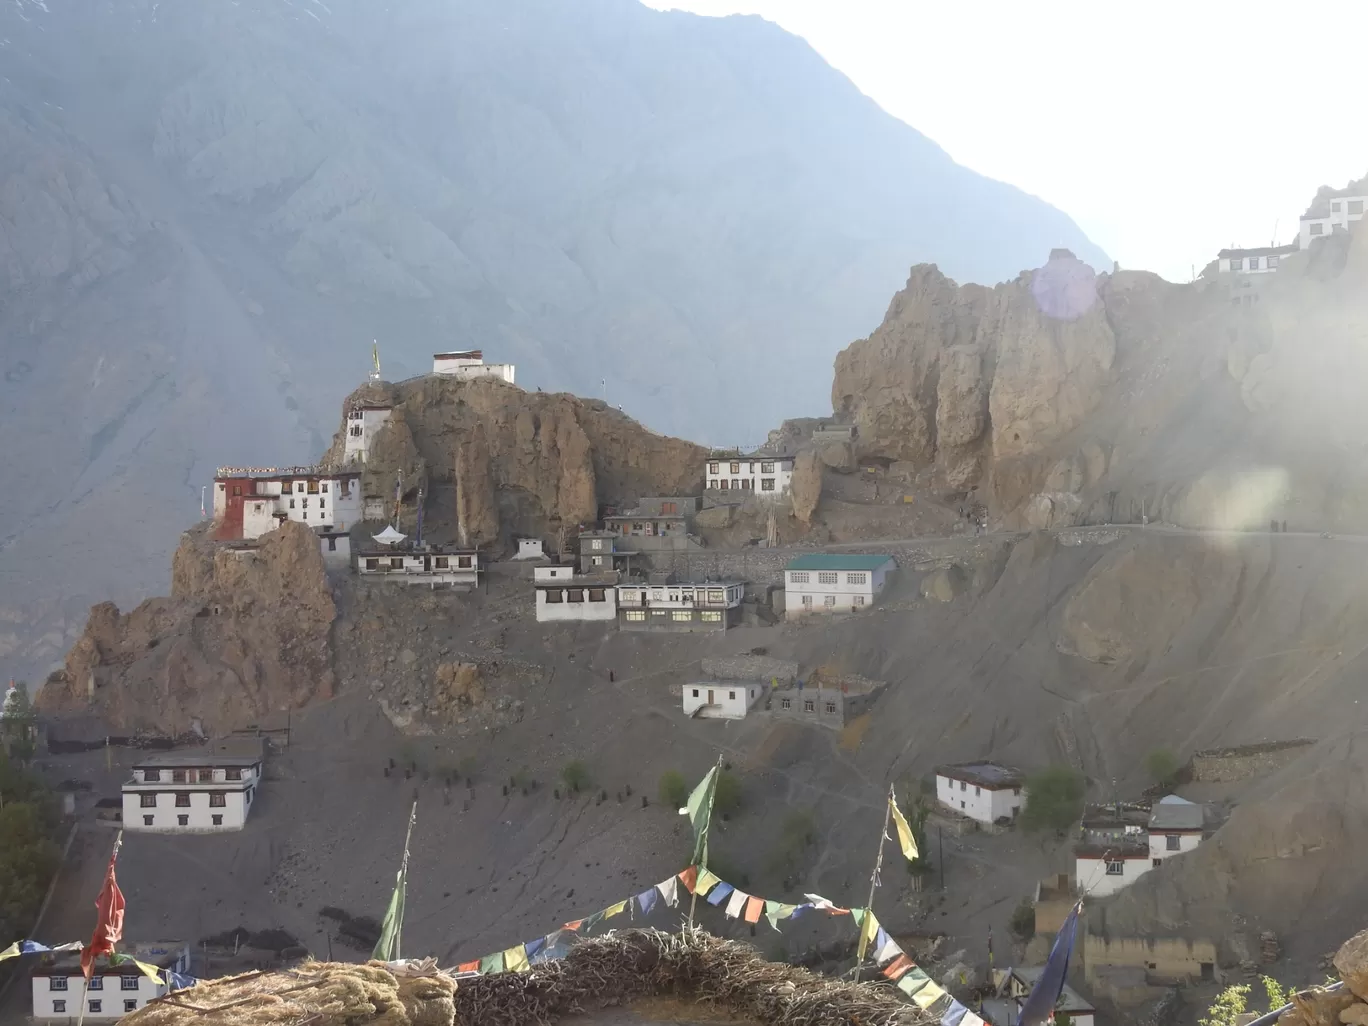 Photo of Spiti Valley Trip By Aastha Sharma